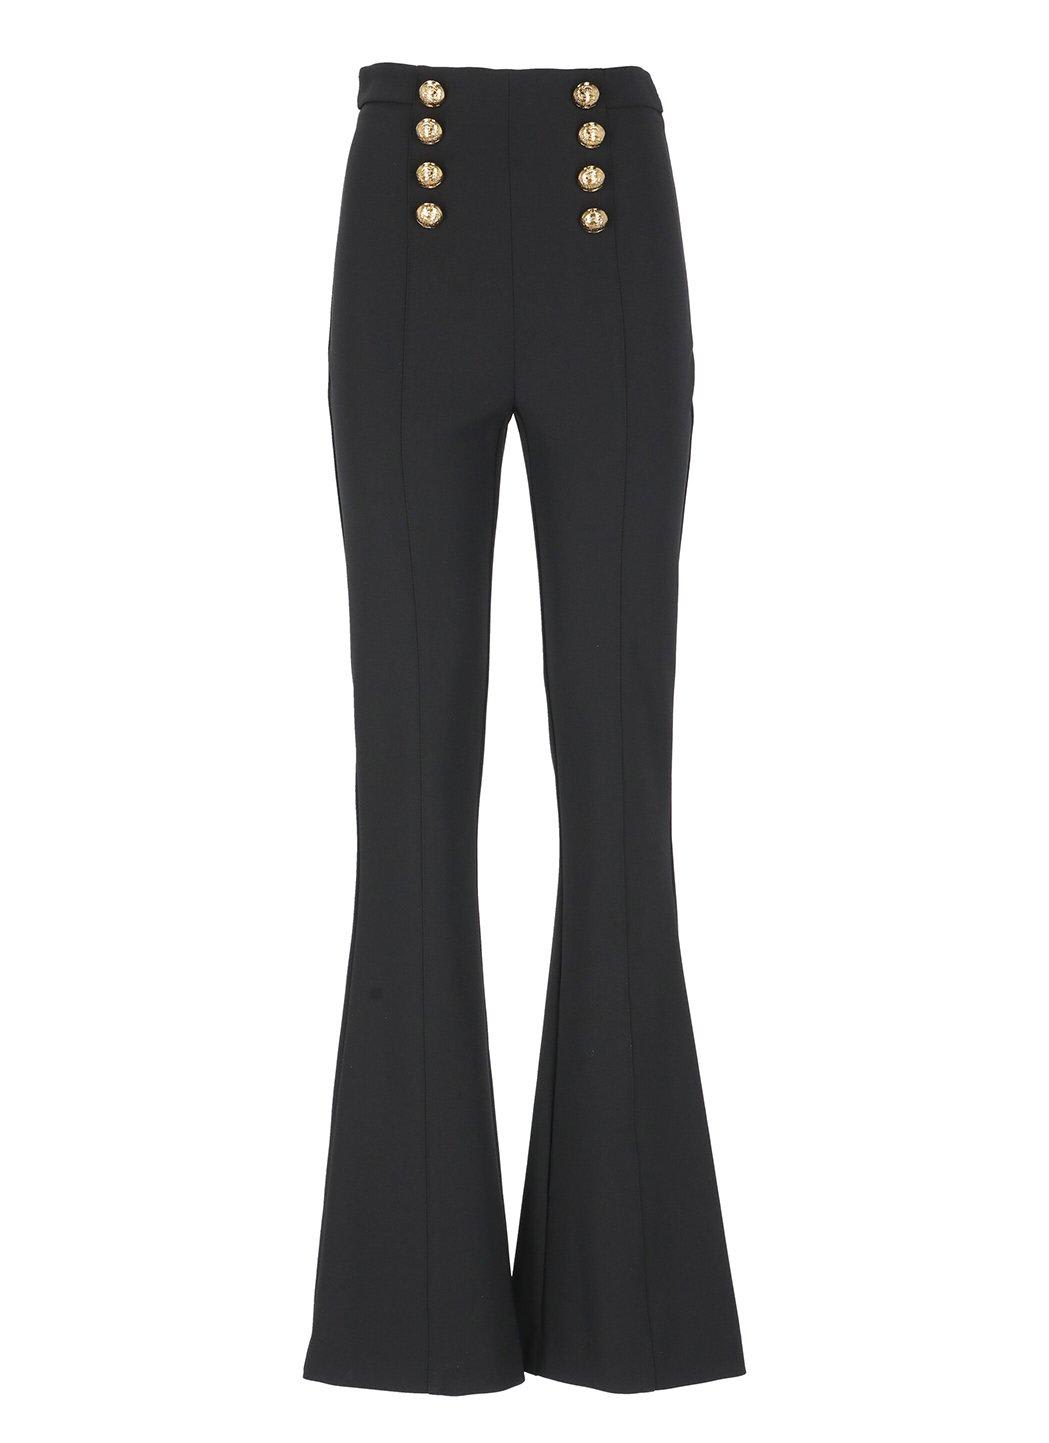 ELISABETTA FRANCHI DOUBLE-BREASTED HIGH-WAIST FLARED TROUSERS